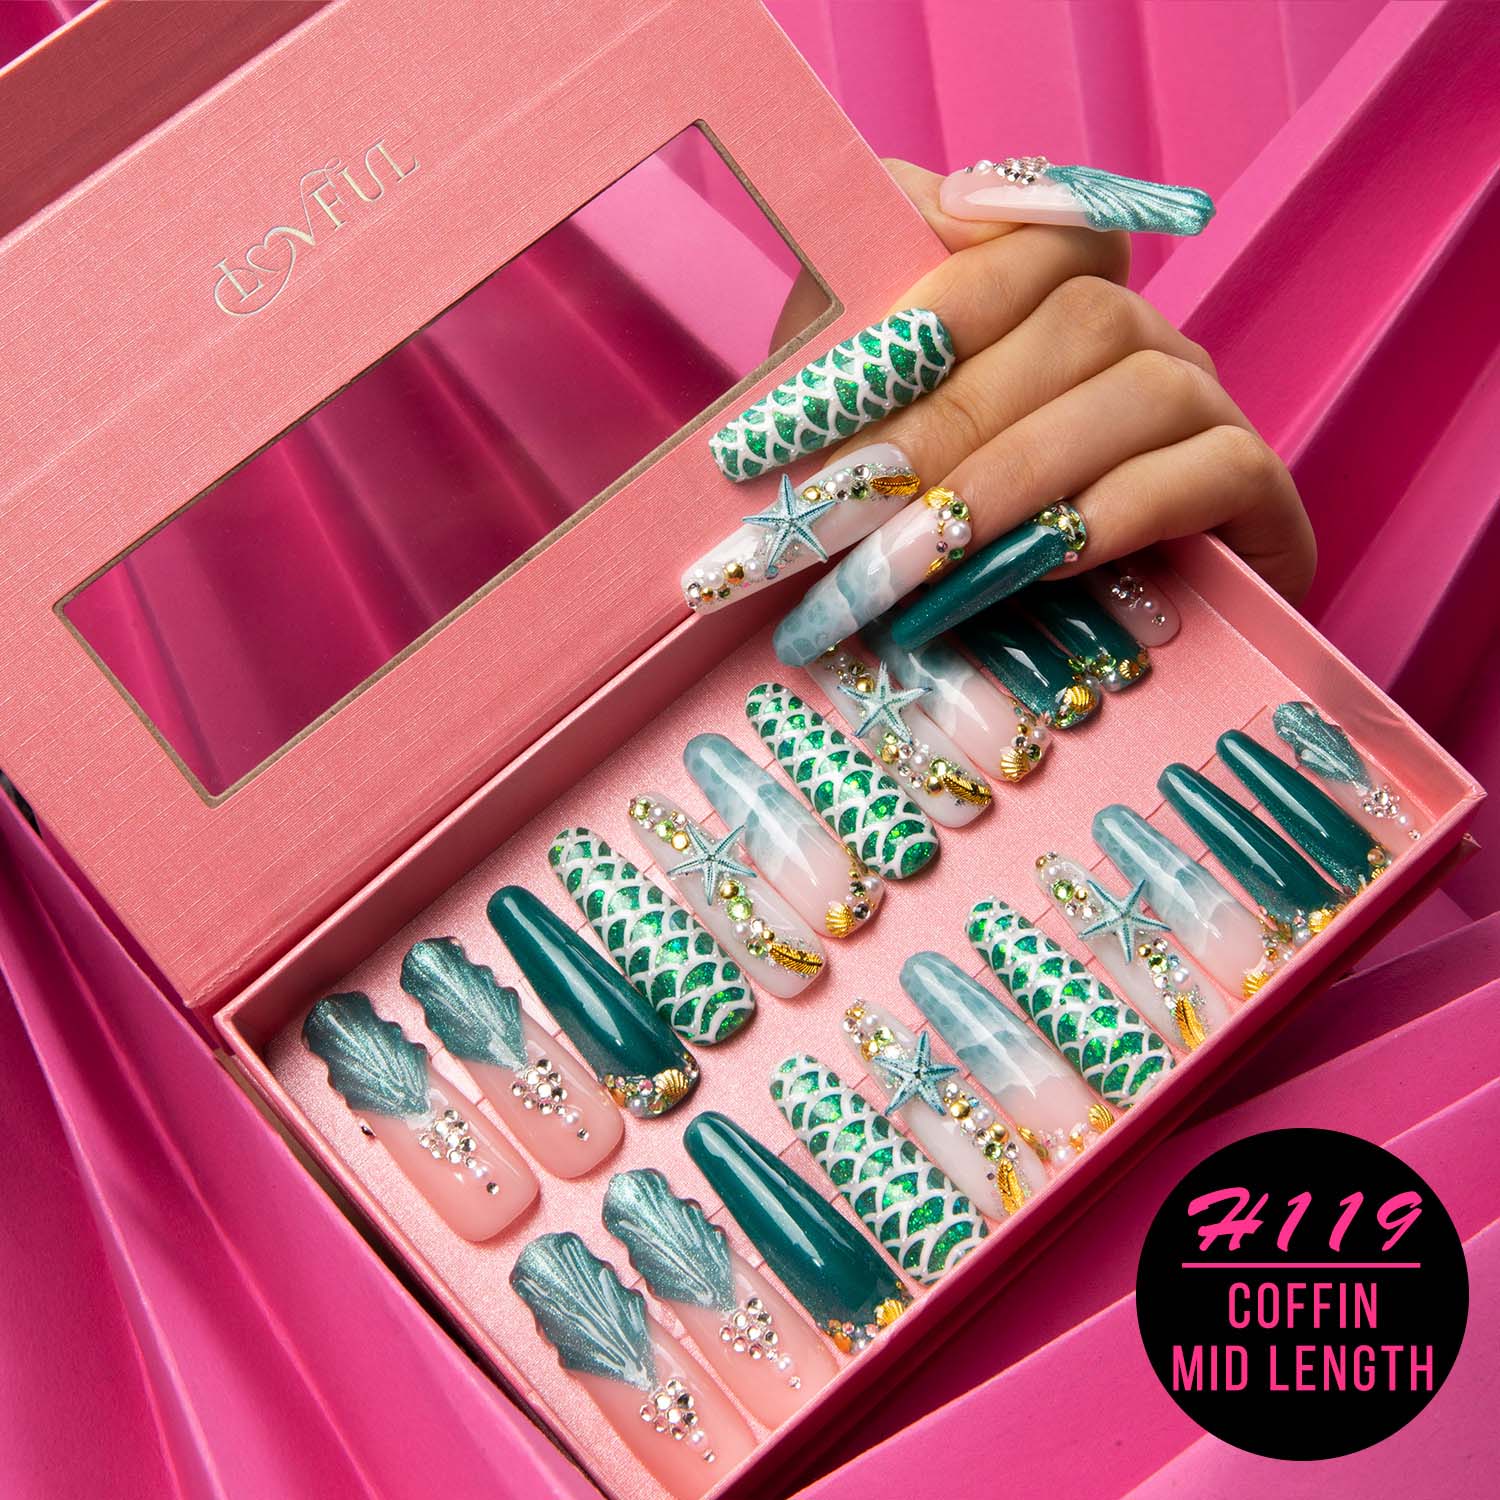 H119 - Surfing Girls press-on nails set with a Hawaii sea blue base color, starfish and glitter decorations in a pink box. Coffin-shaped, mid-length design.